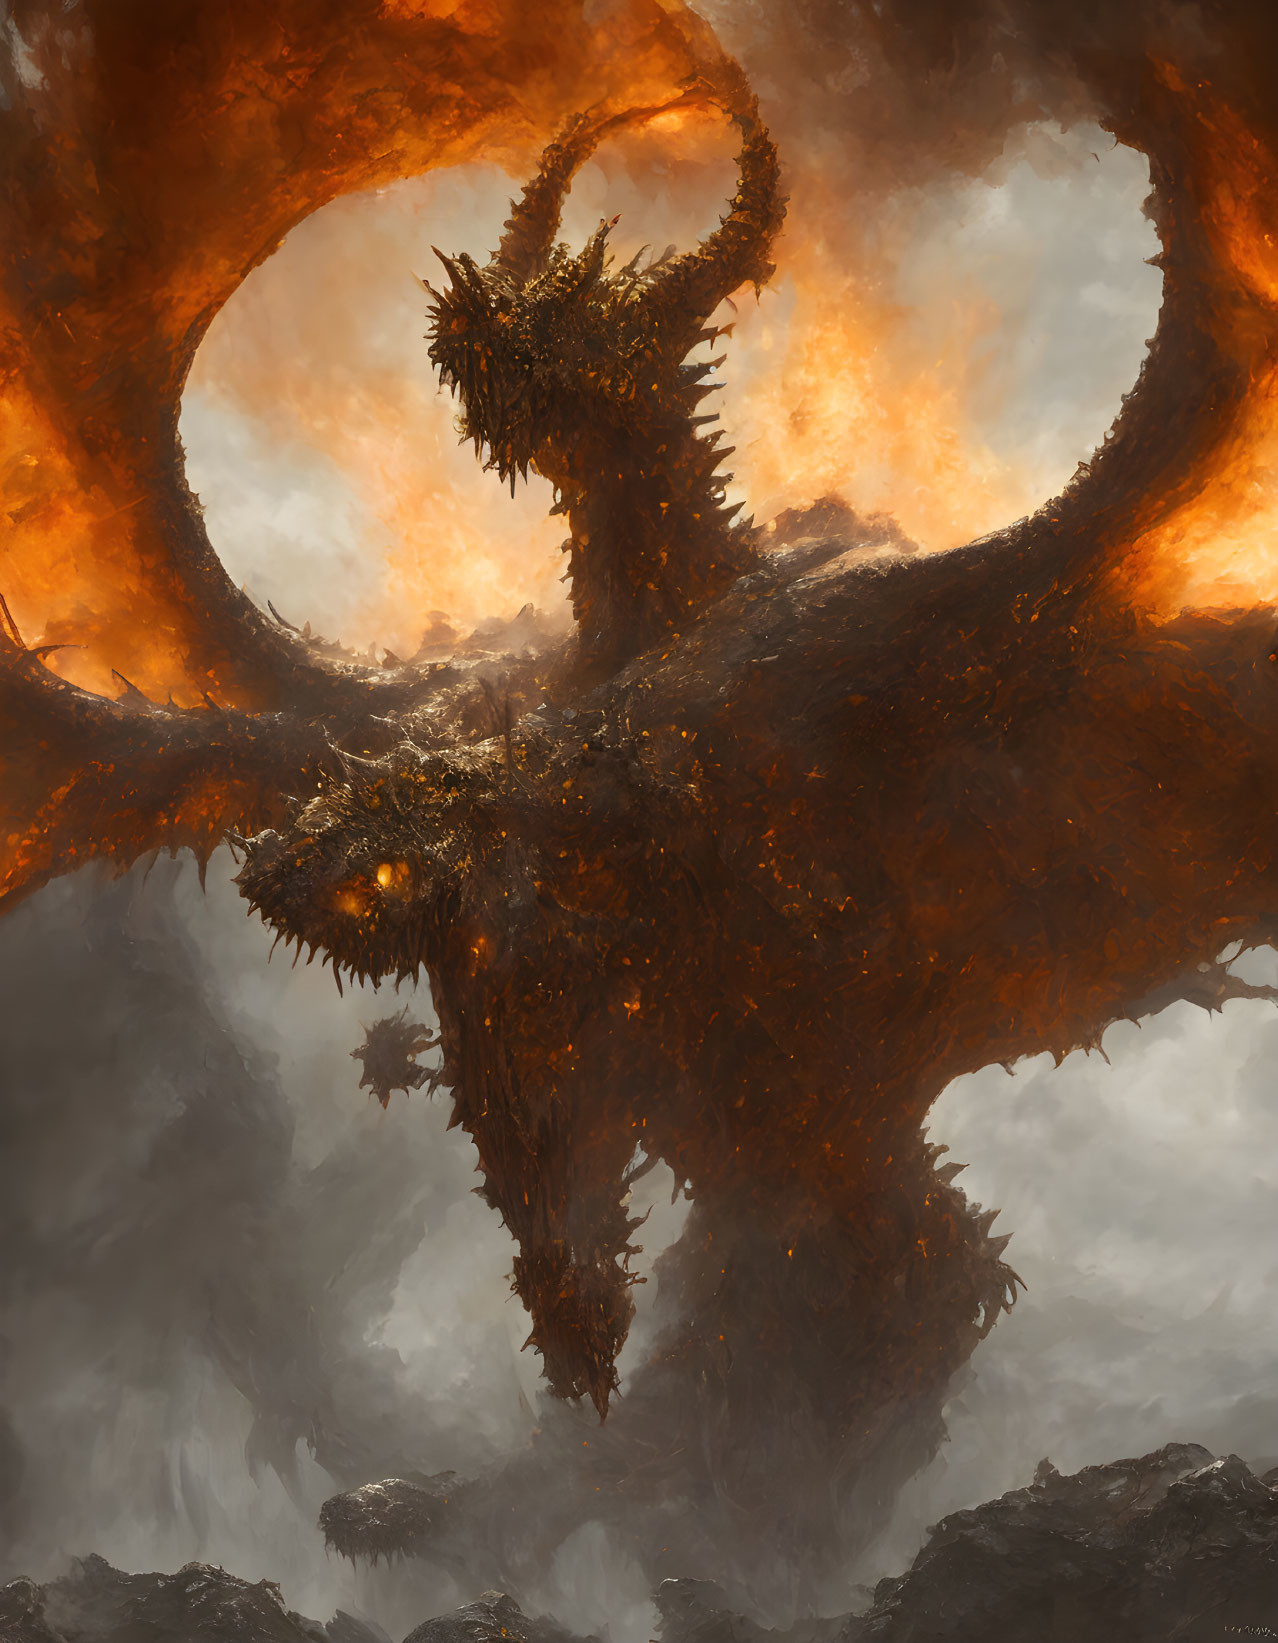 Massive magma and rock dragon engulfed in flames against fiery backdrop